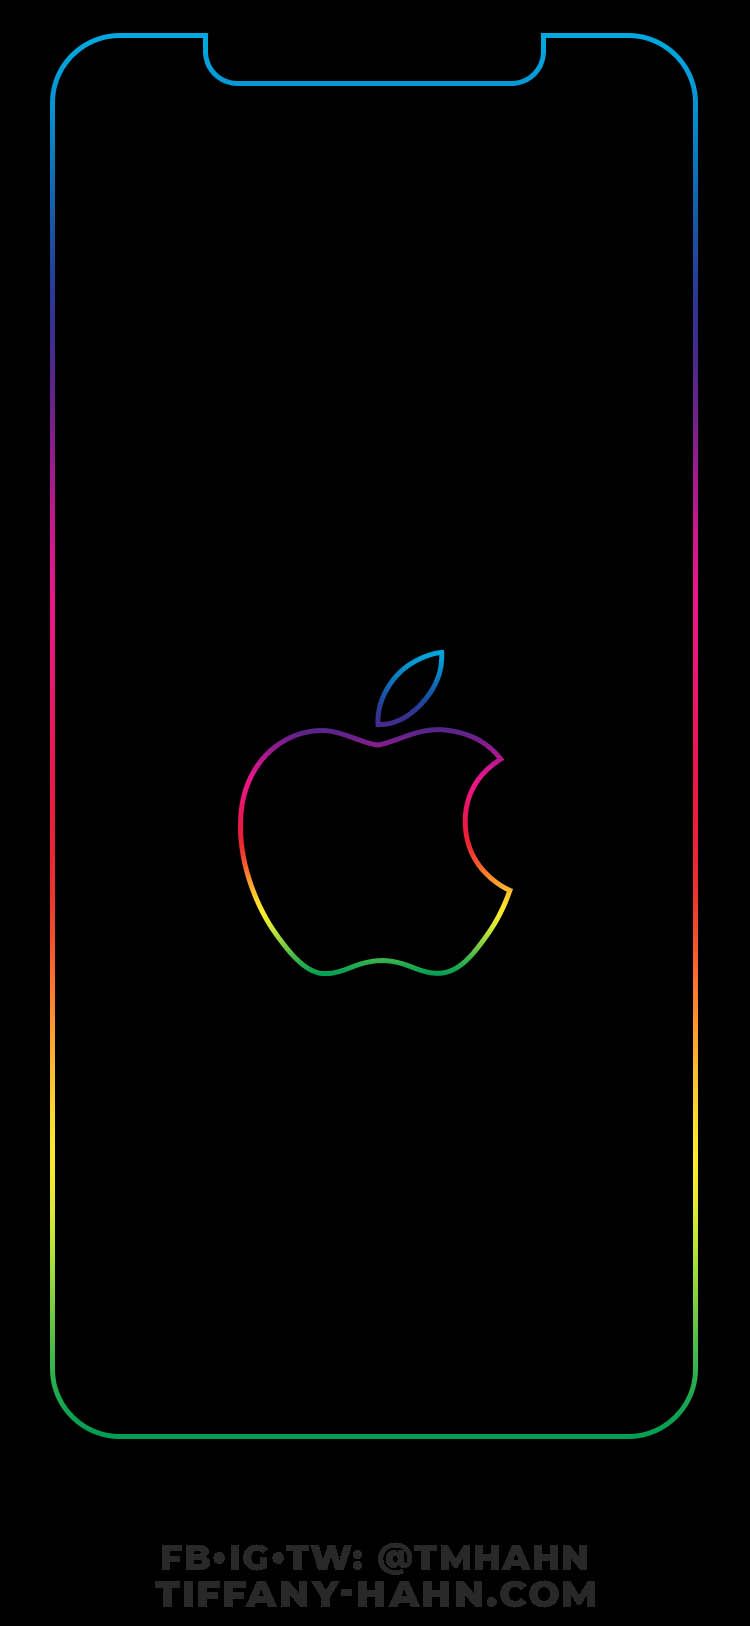 This wallpaper will perfectly fit the iPhone XS Max in ZOOMED mode